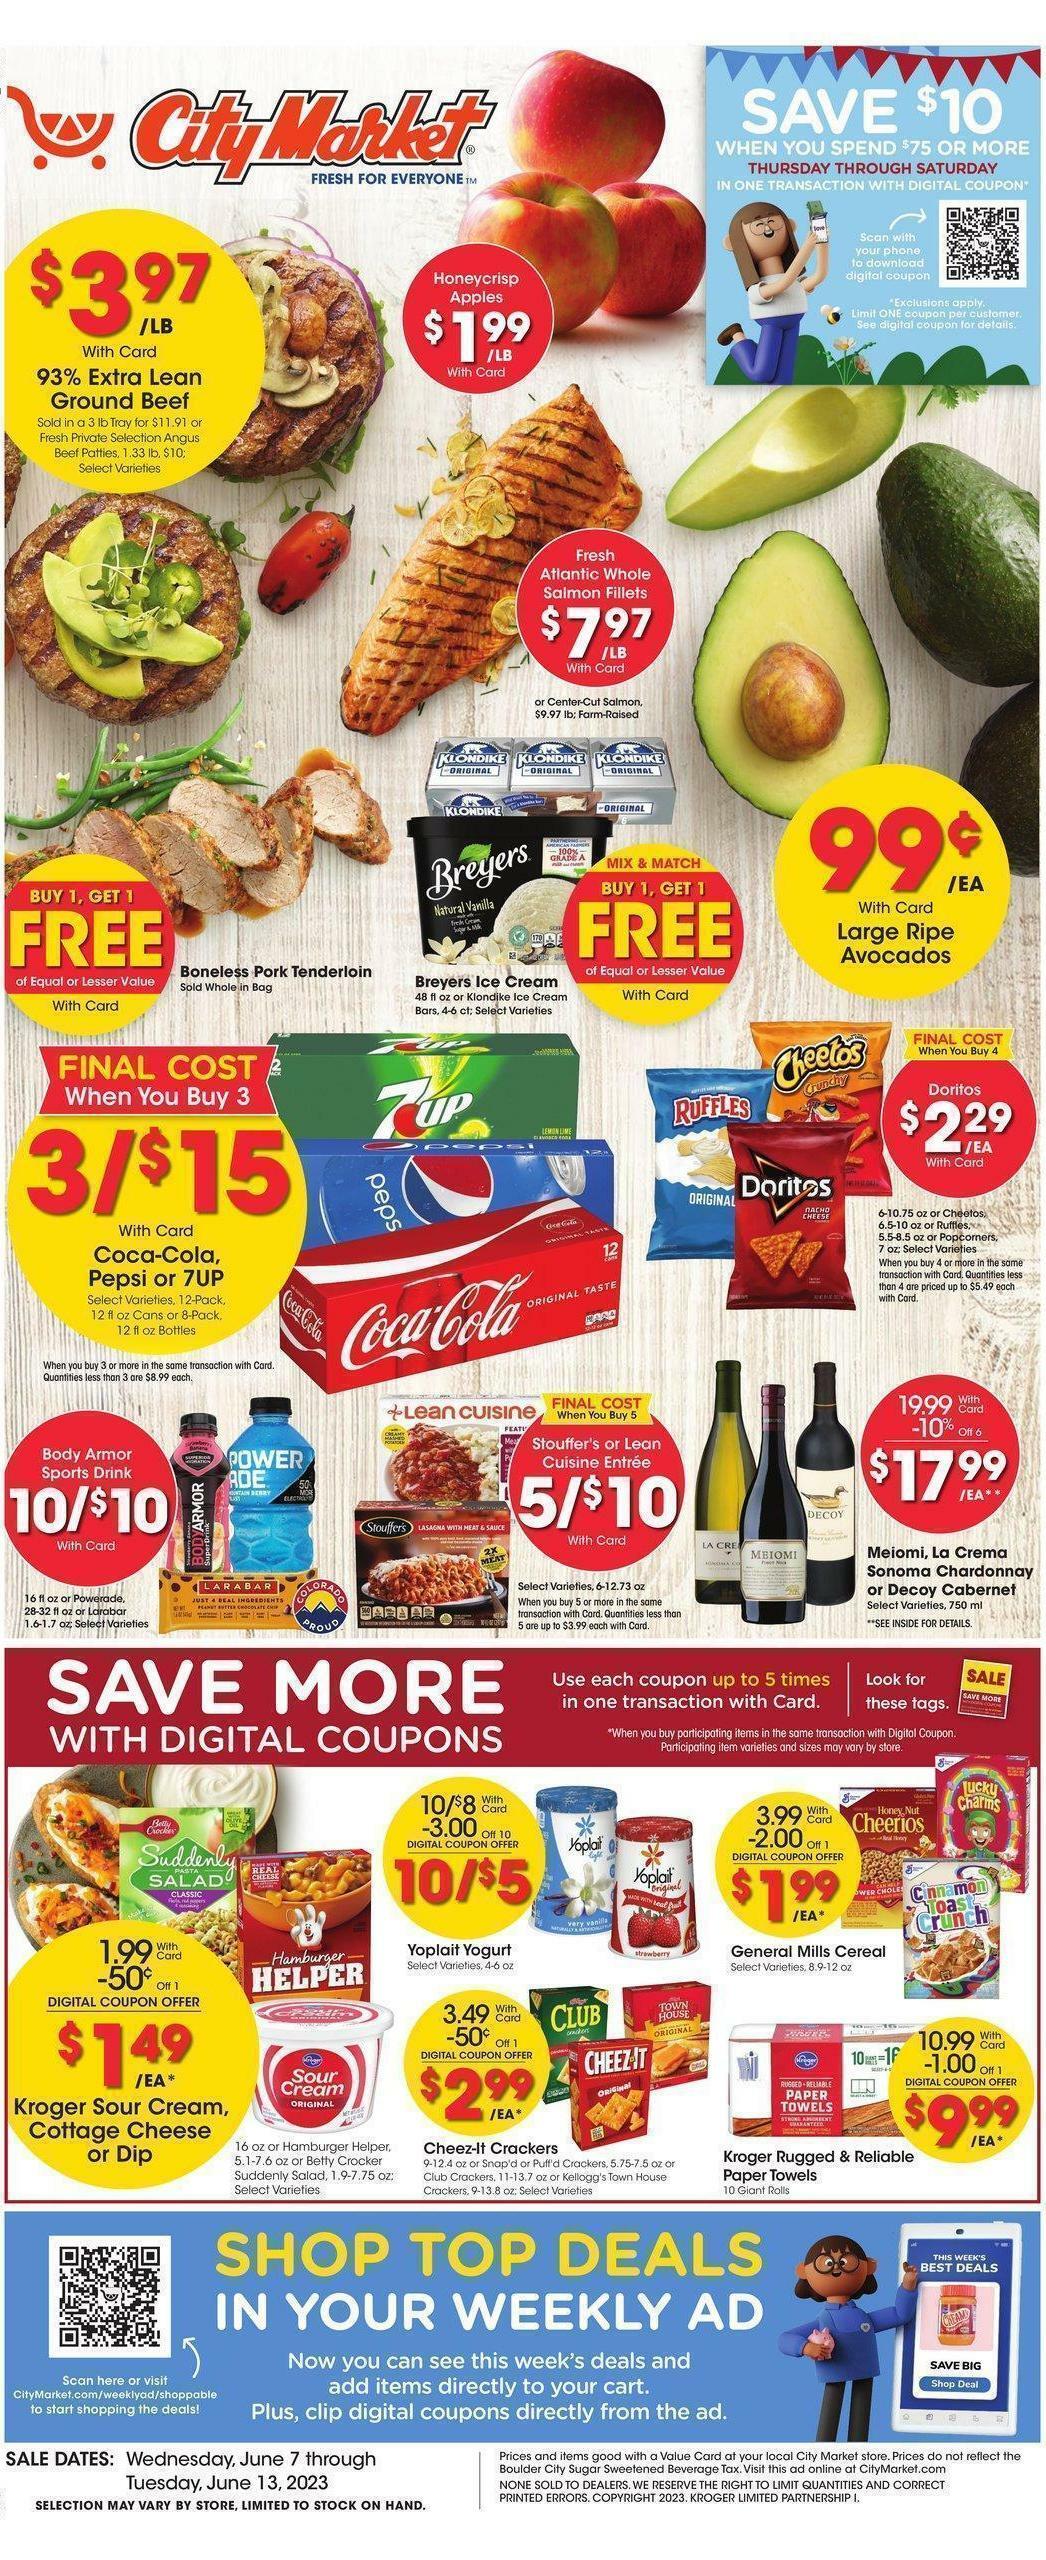 City Market Weekly Ad from June 7